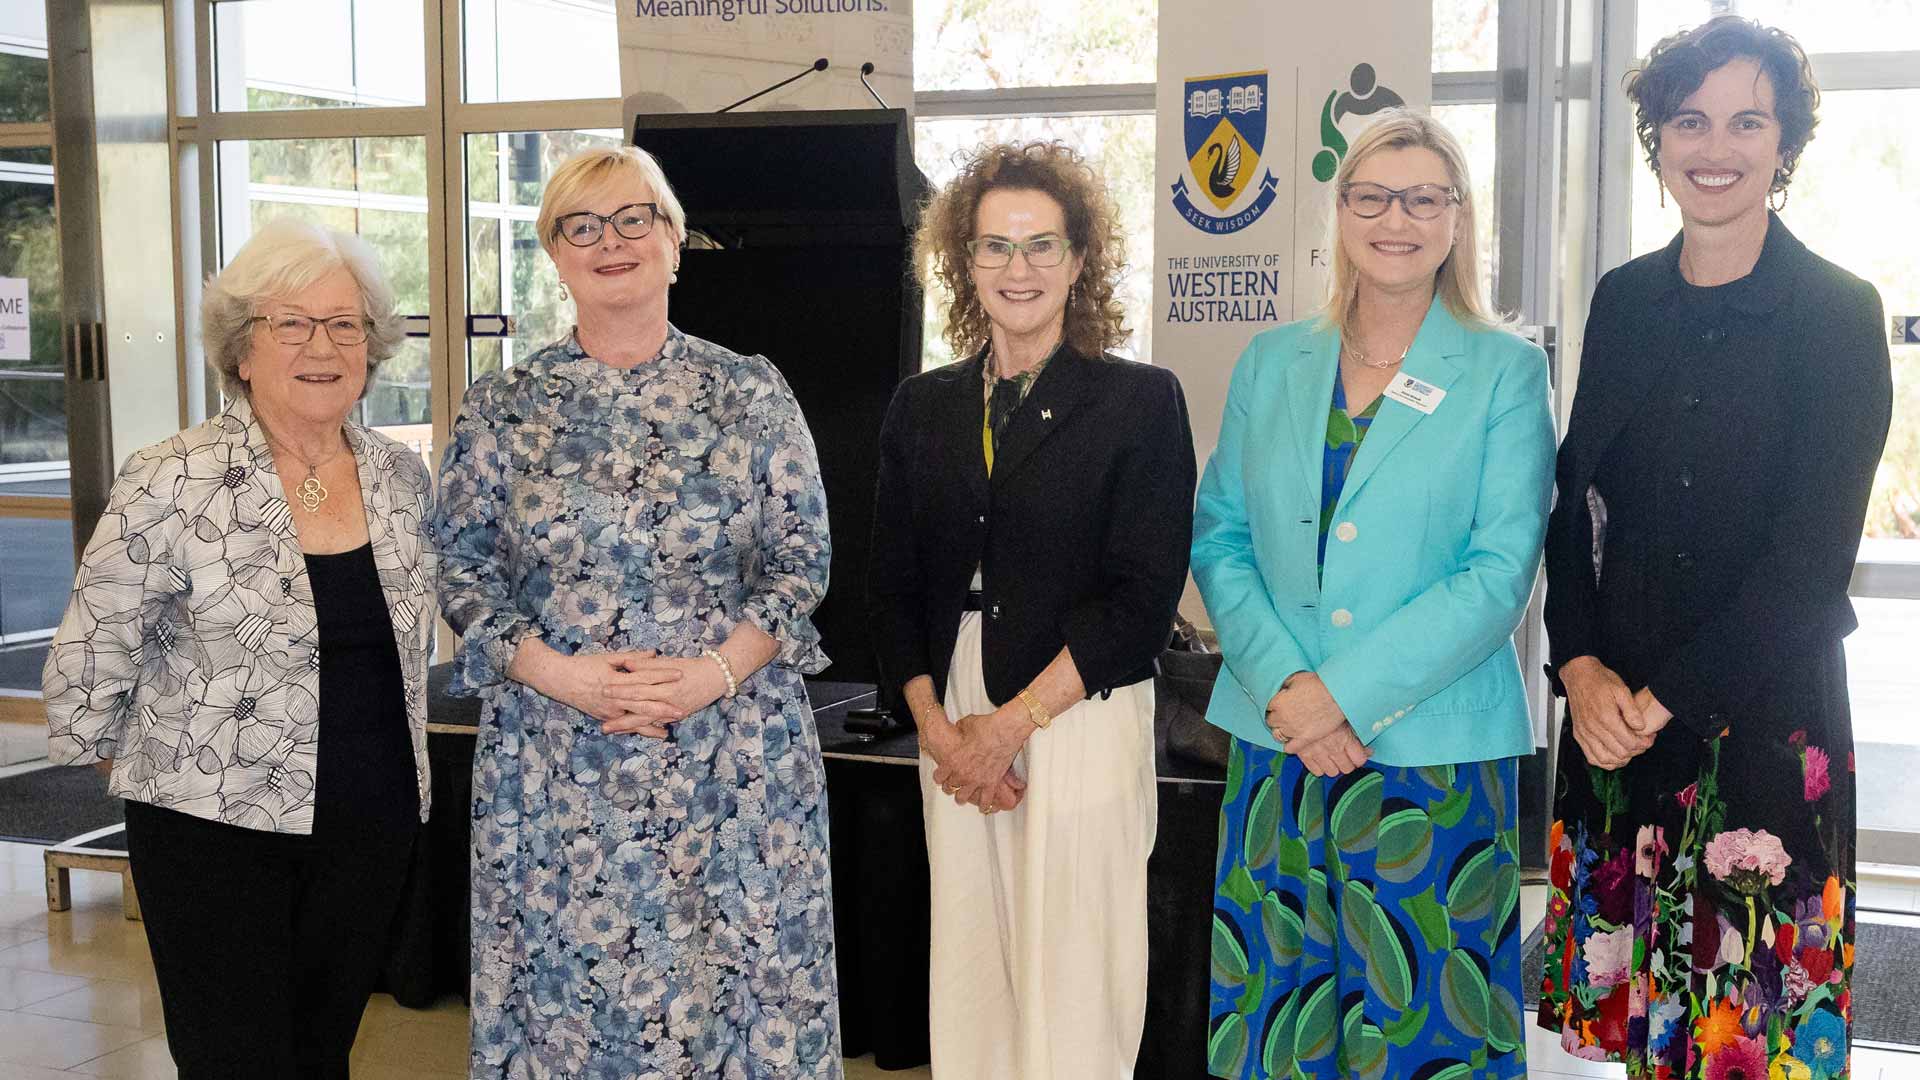 Photo of five women in colourful business dress posing for a photo in front of a podium and banner advertising The University of Western Australia